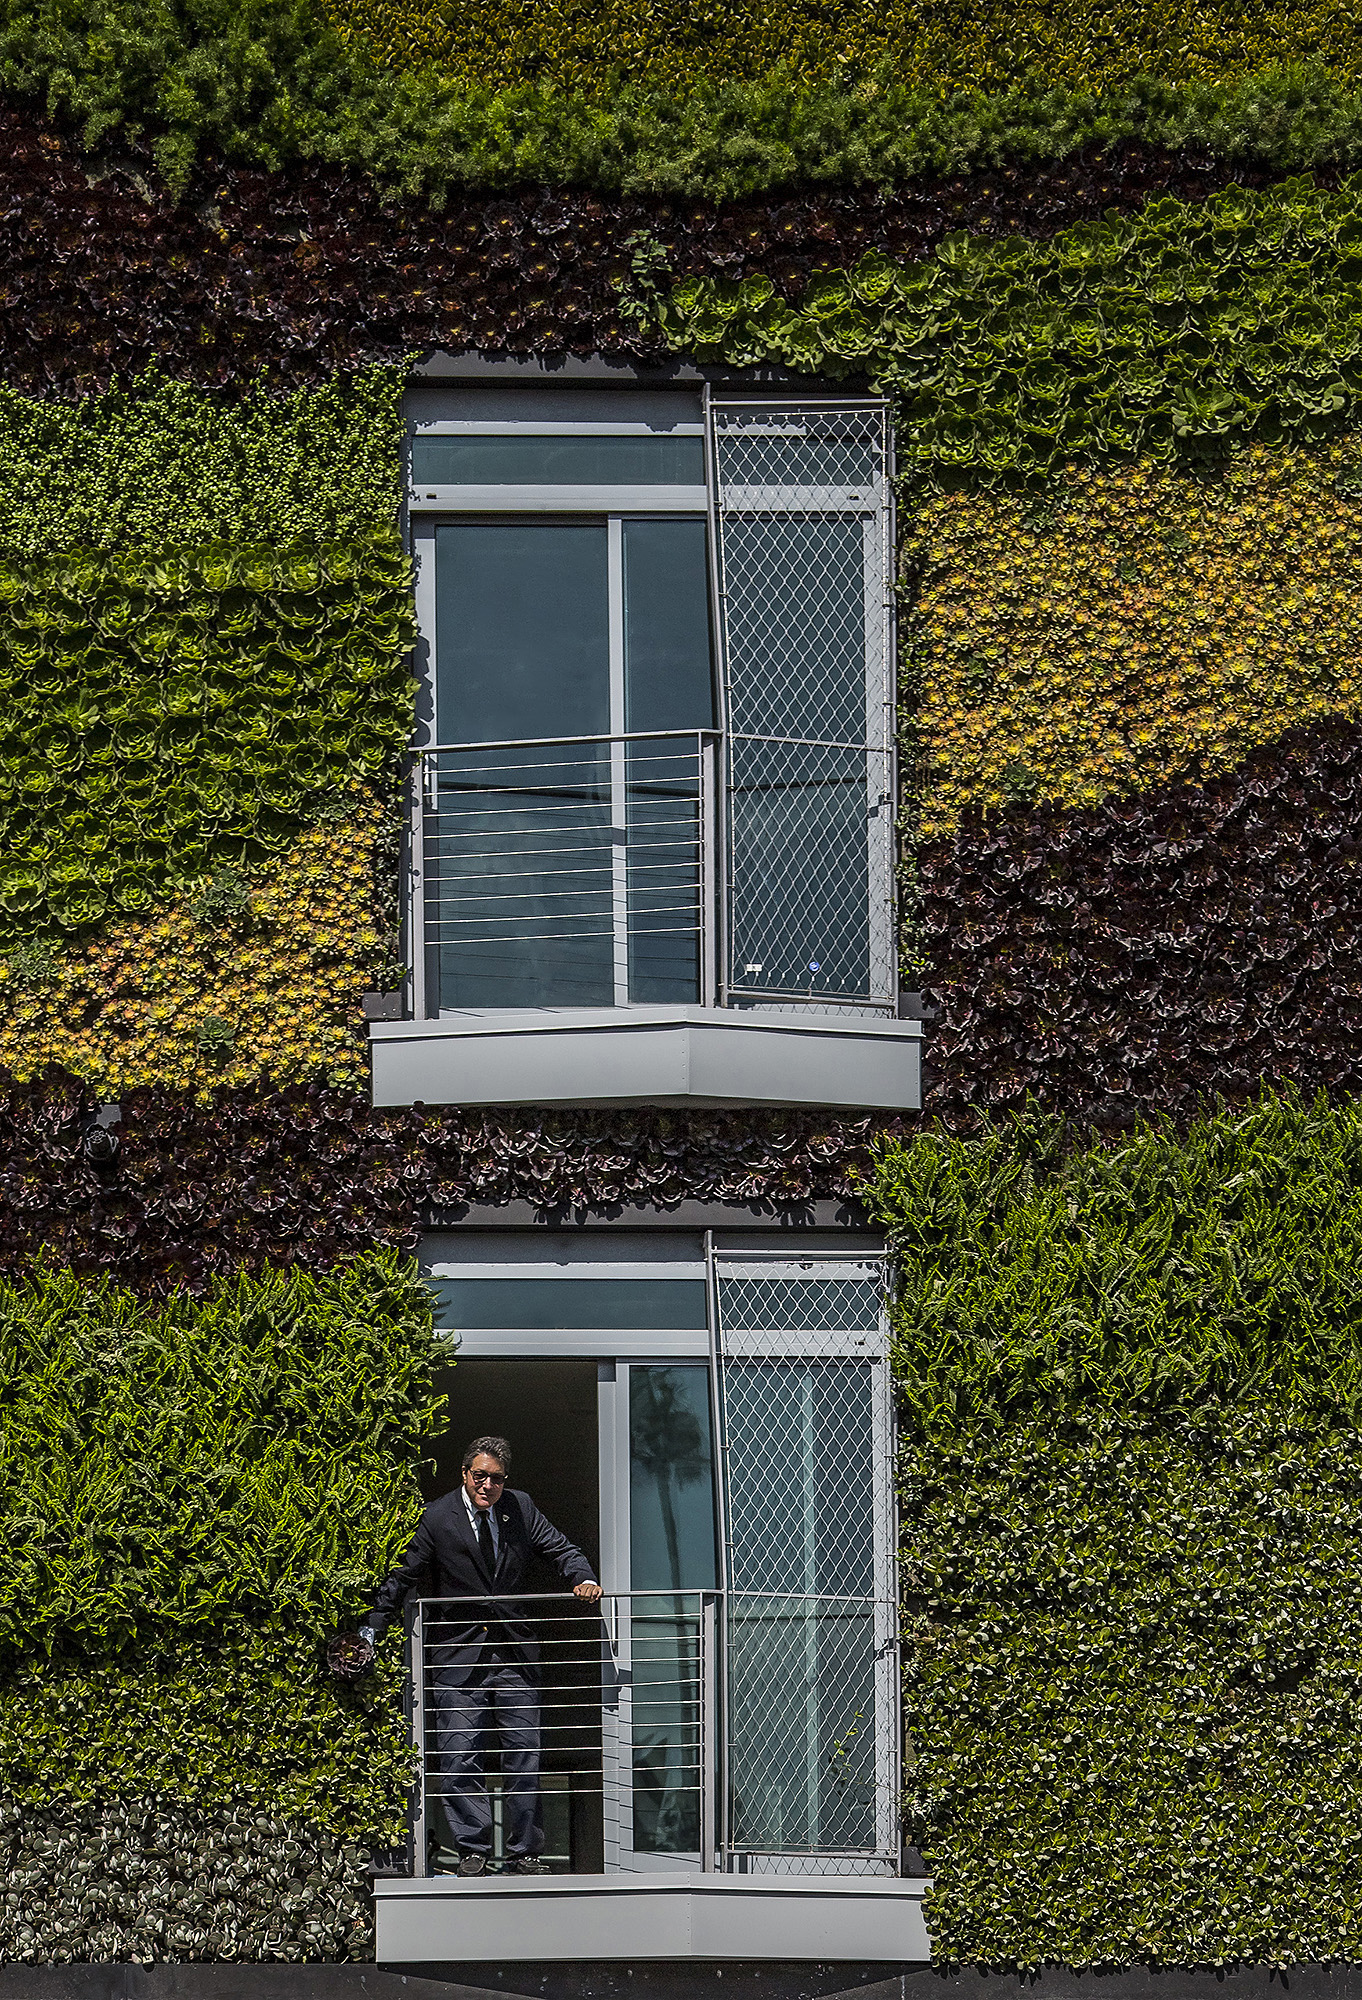 12_MAD_Gardenhouse_Green Wall_photo by Manolo Langis